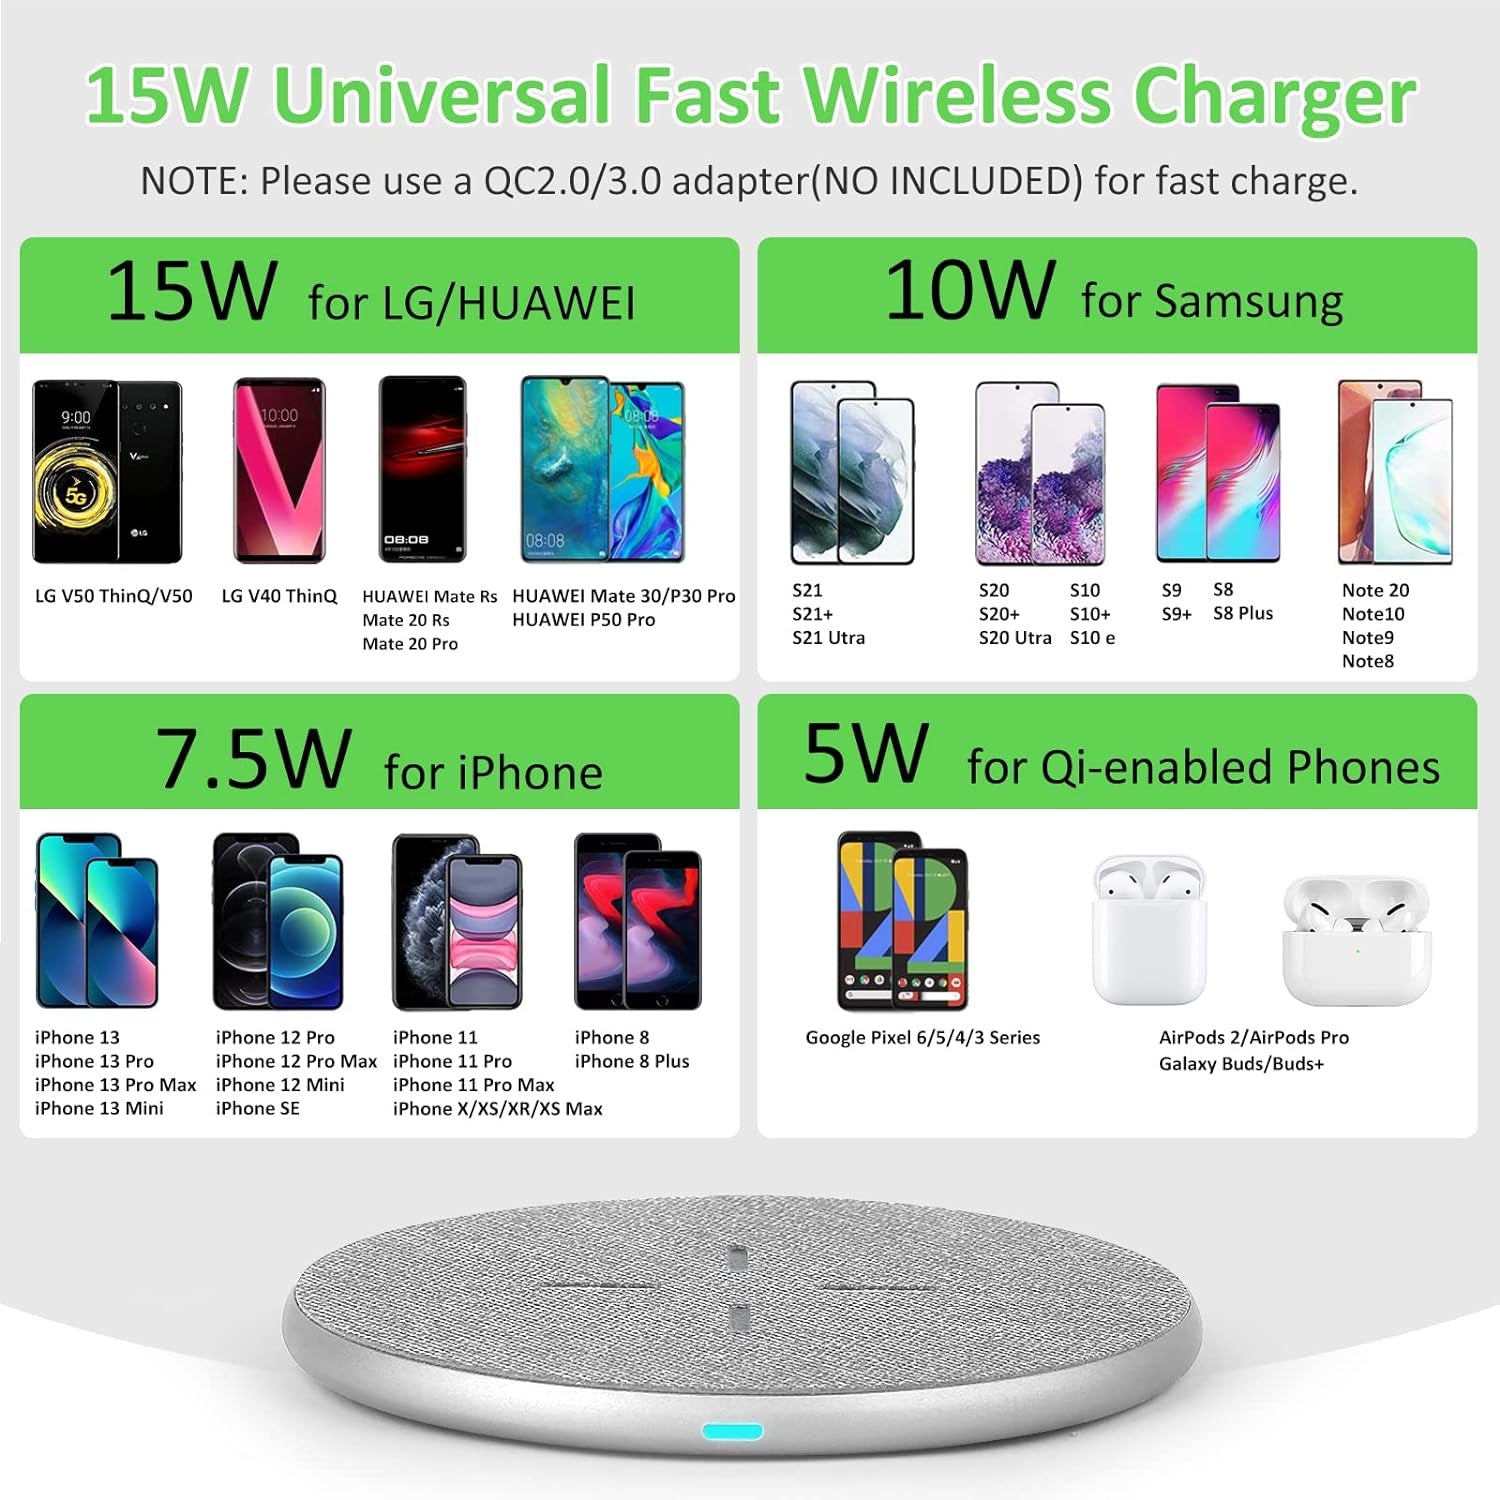 Wireless Charger for Iphone 15/14/13 Pro Max/12/11/Xs Max/Xr/X/8 Plus,15W Max Fast Charging Pad for Samsung Galaxy S22/S21/S20/S10/S9/S8, Huawei P30 Pro,5W All Qi-Enabled Phones Airpods Pro